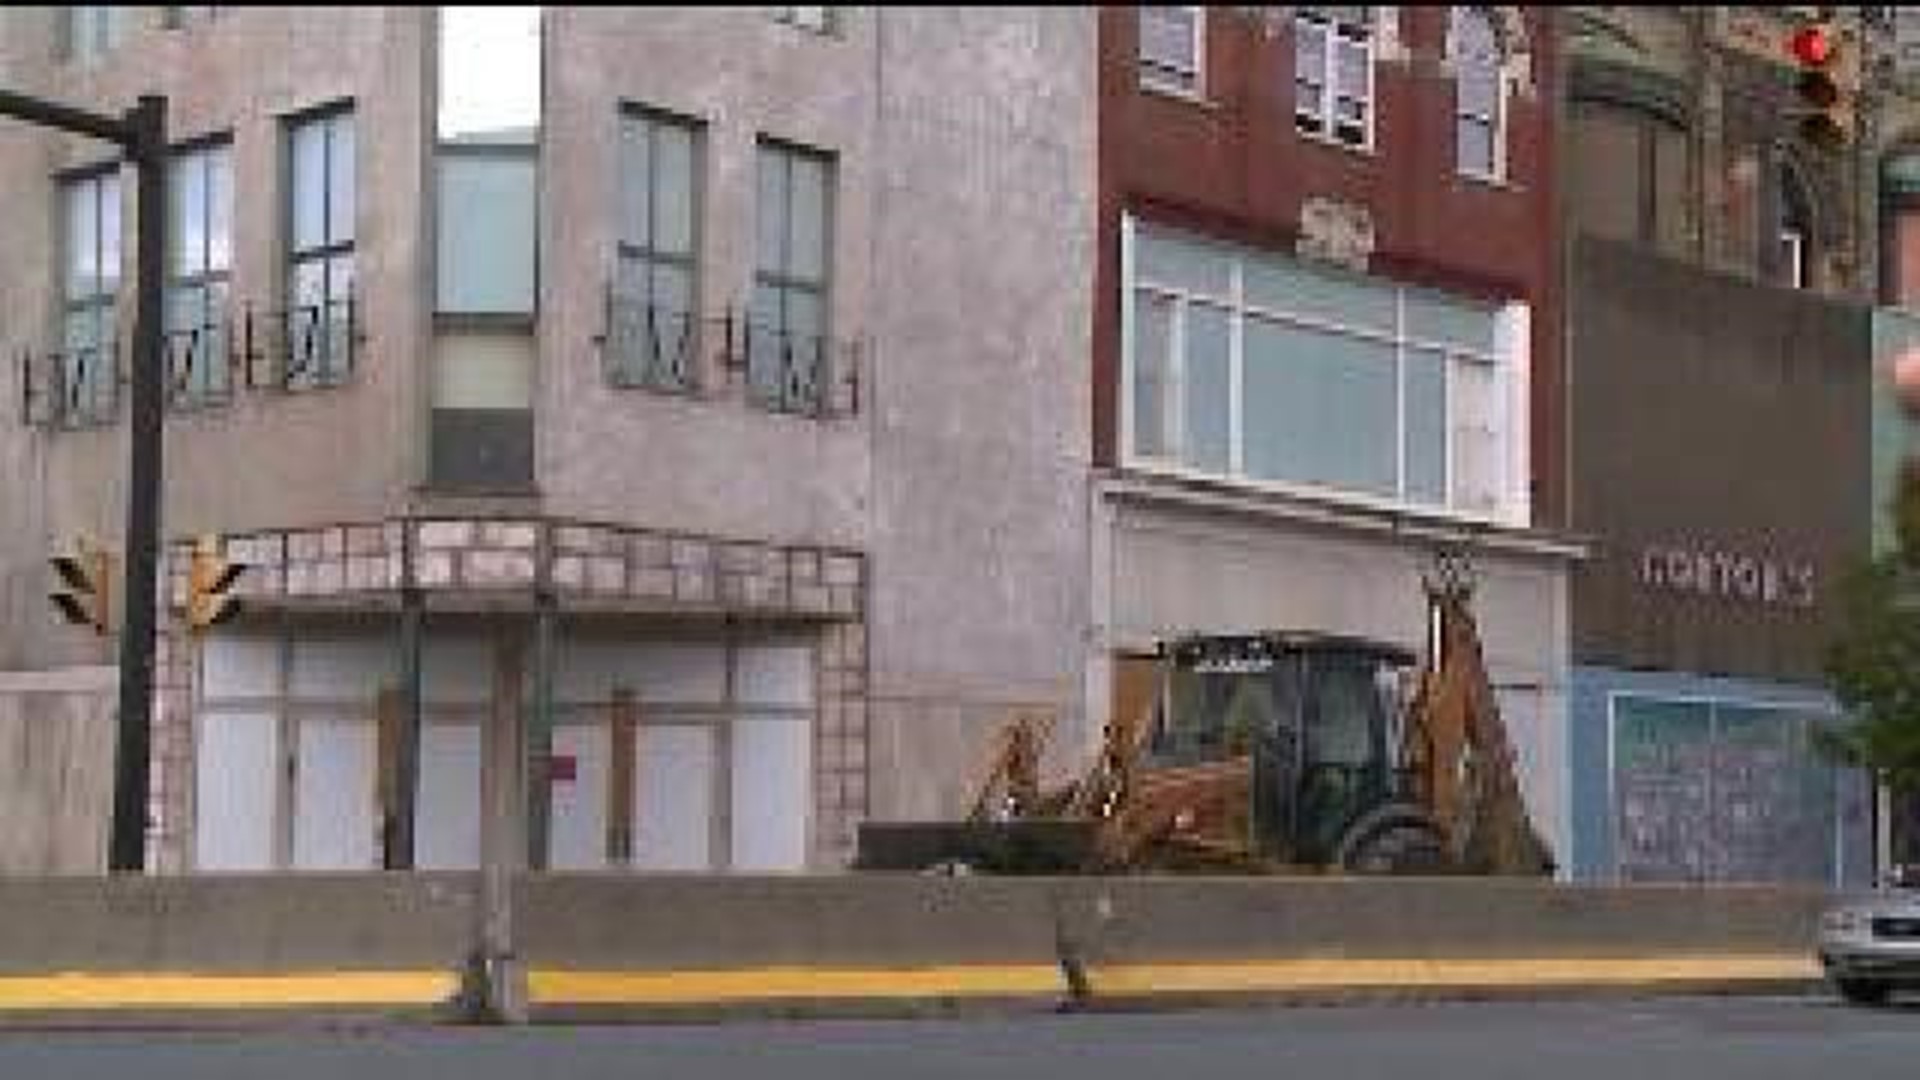 Downtown Demolition Contract Awarded